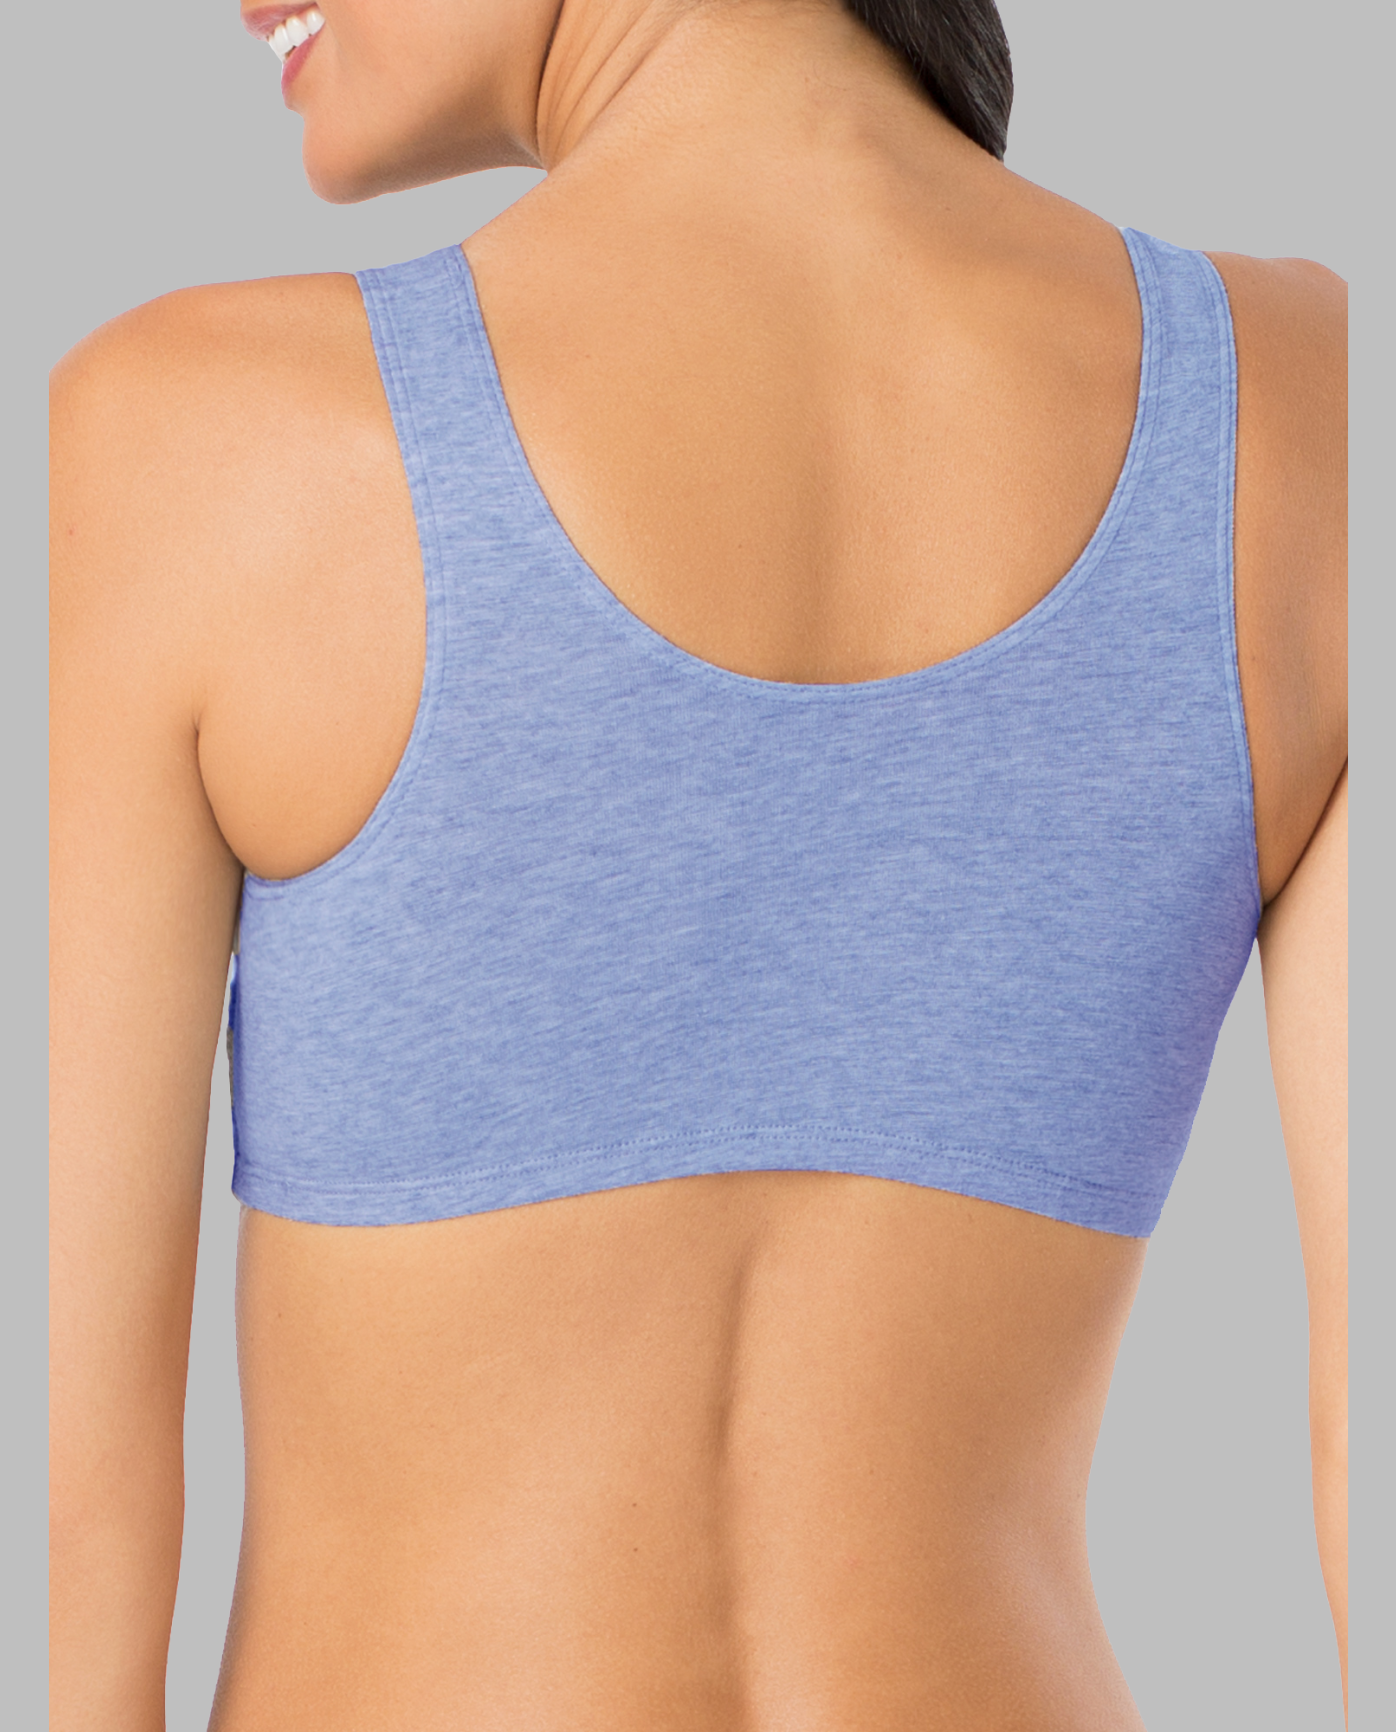 Fruit Of The Loom Sports Bra Size Chart